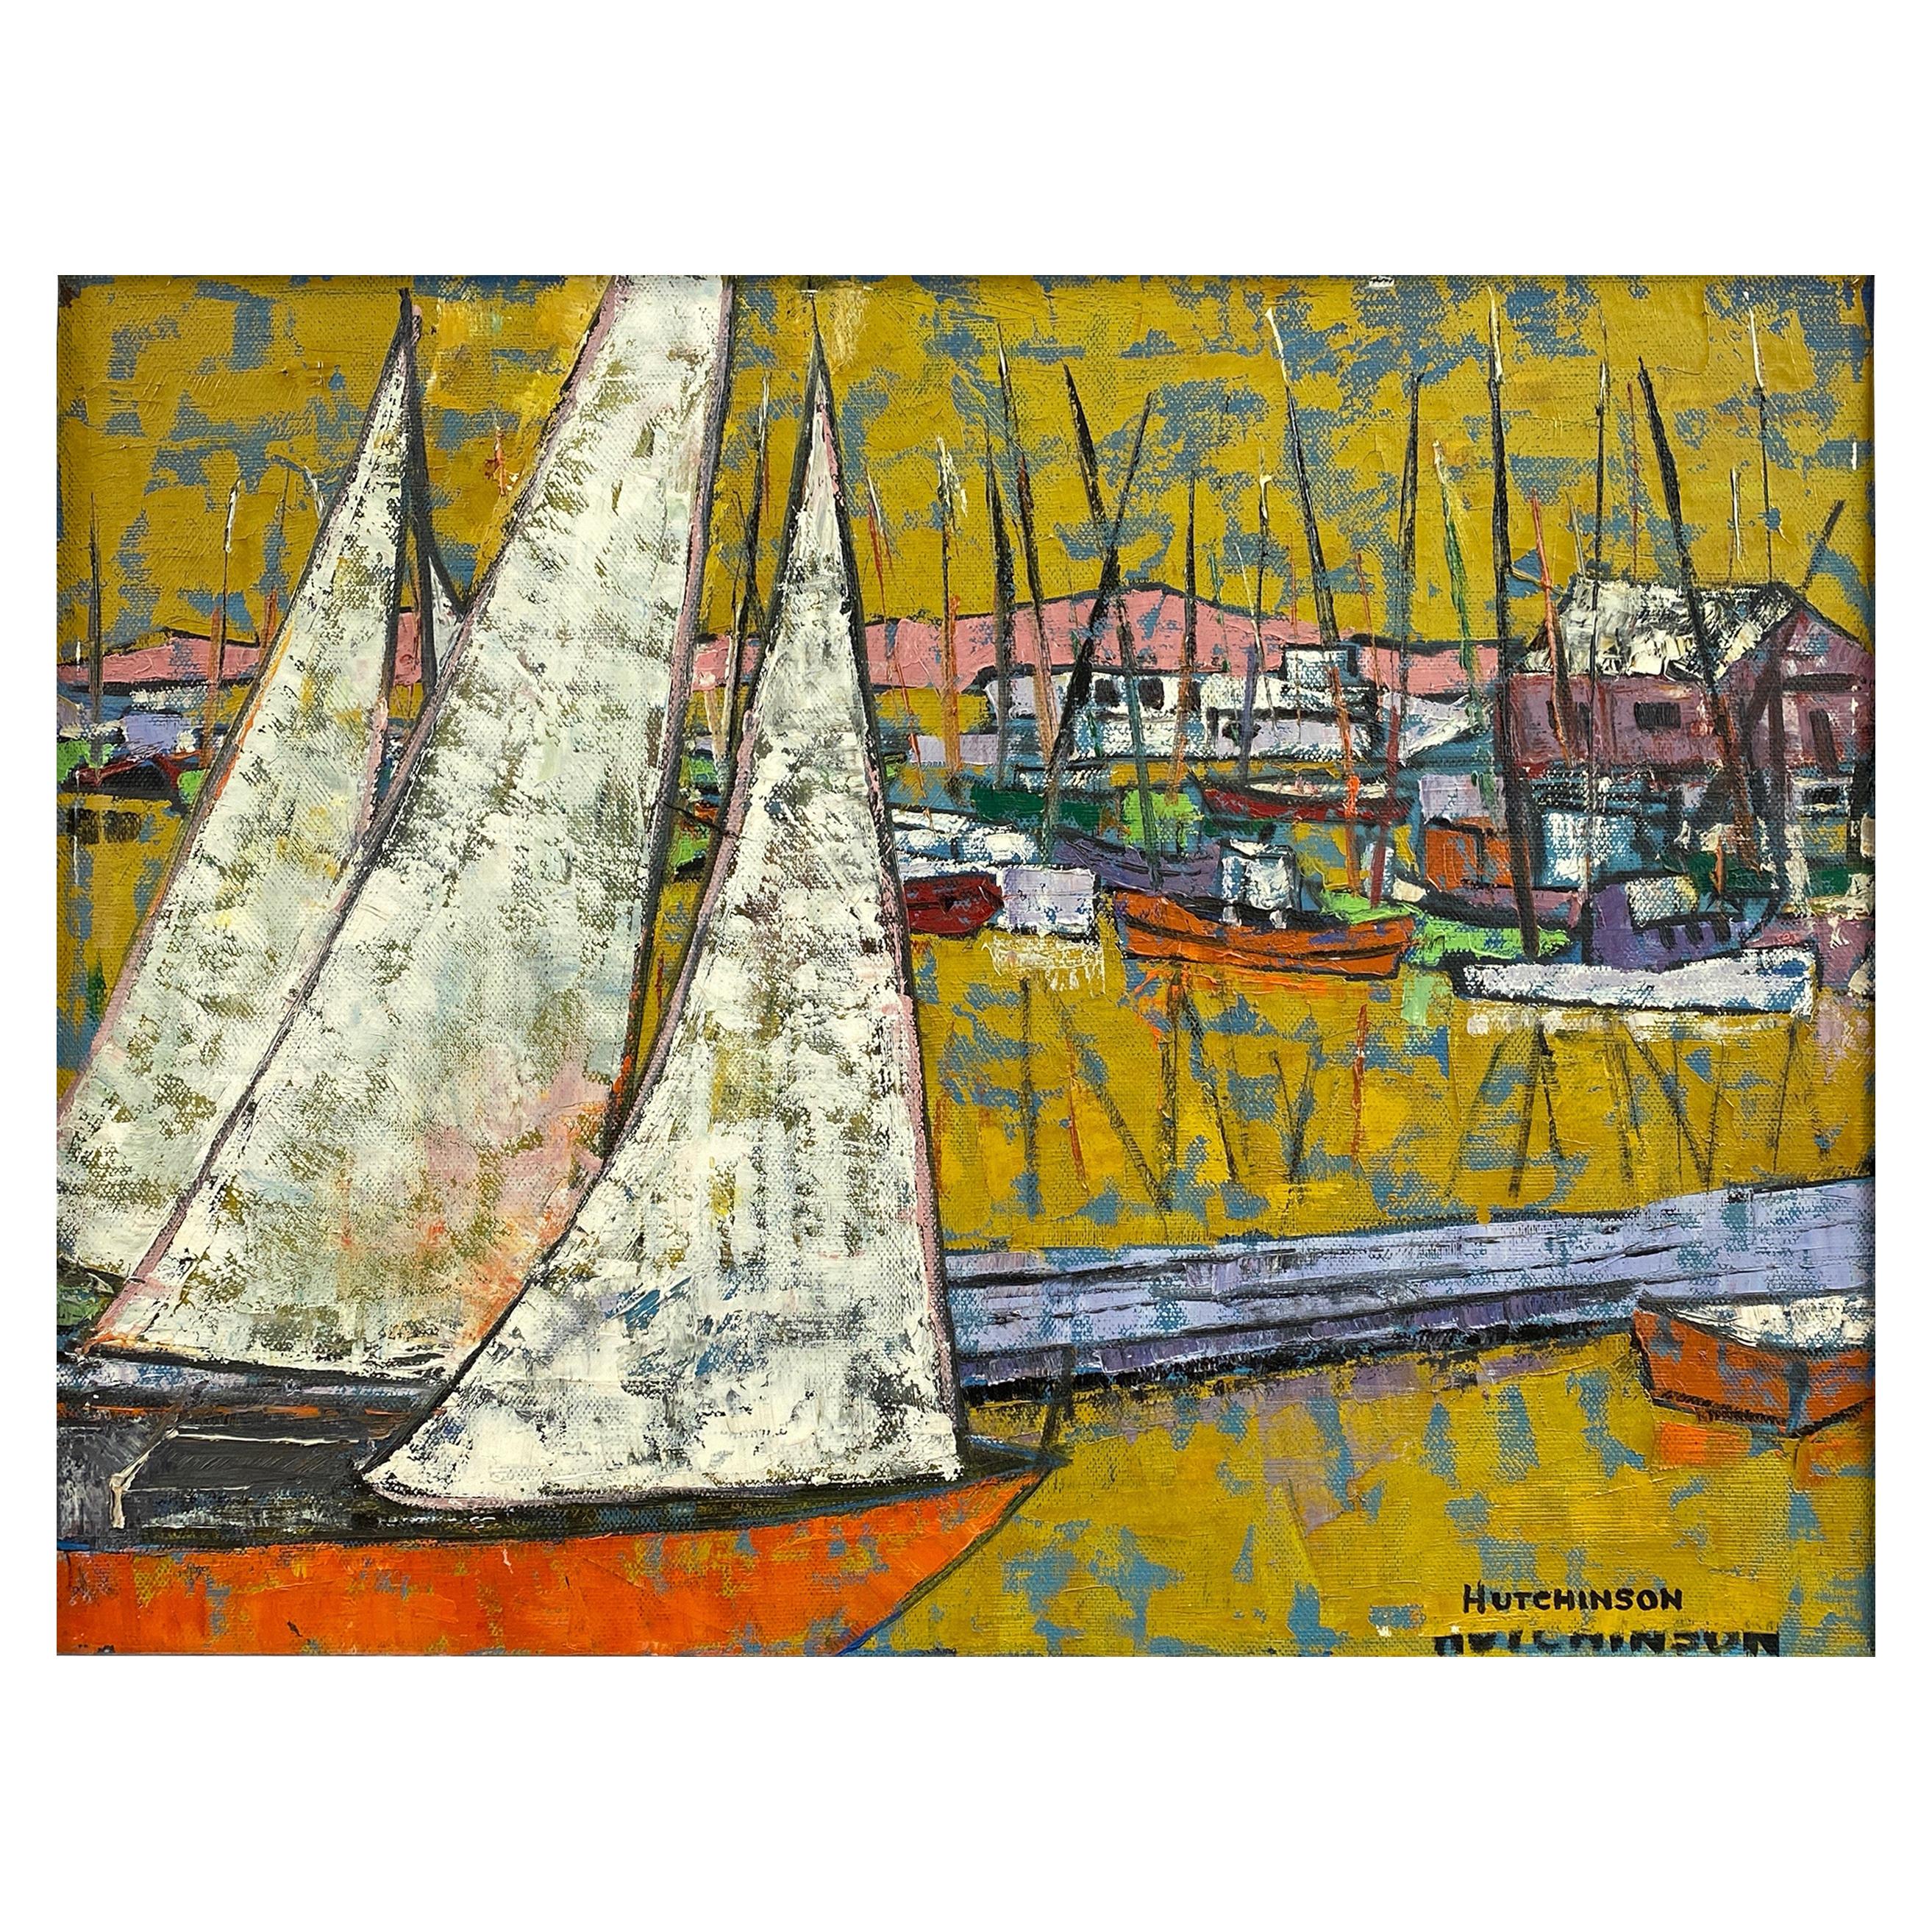 Hutchinson “Boats in Harbor”, Expressionist Acrylic Painting, 1950s